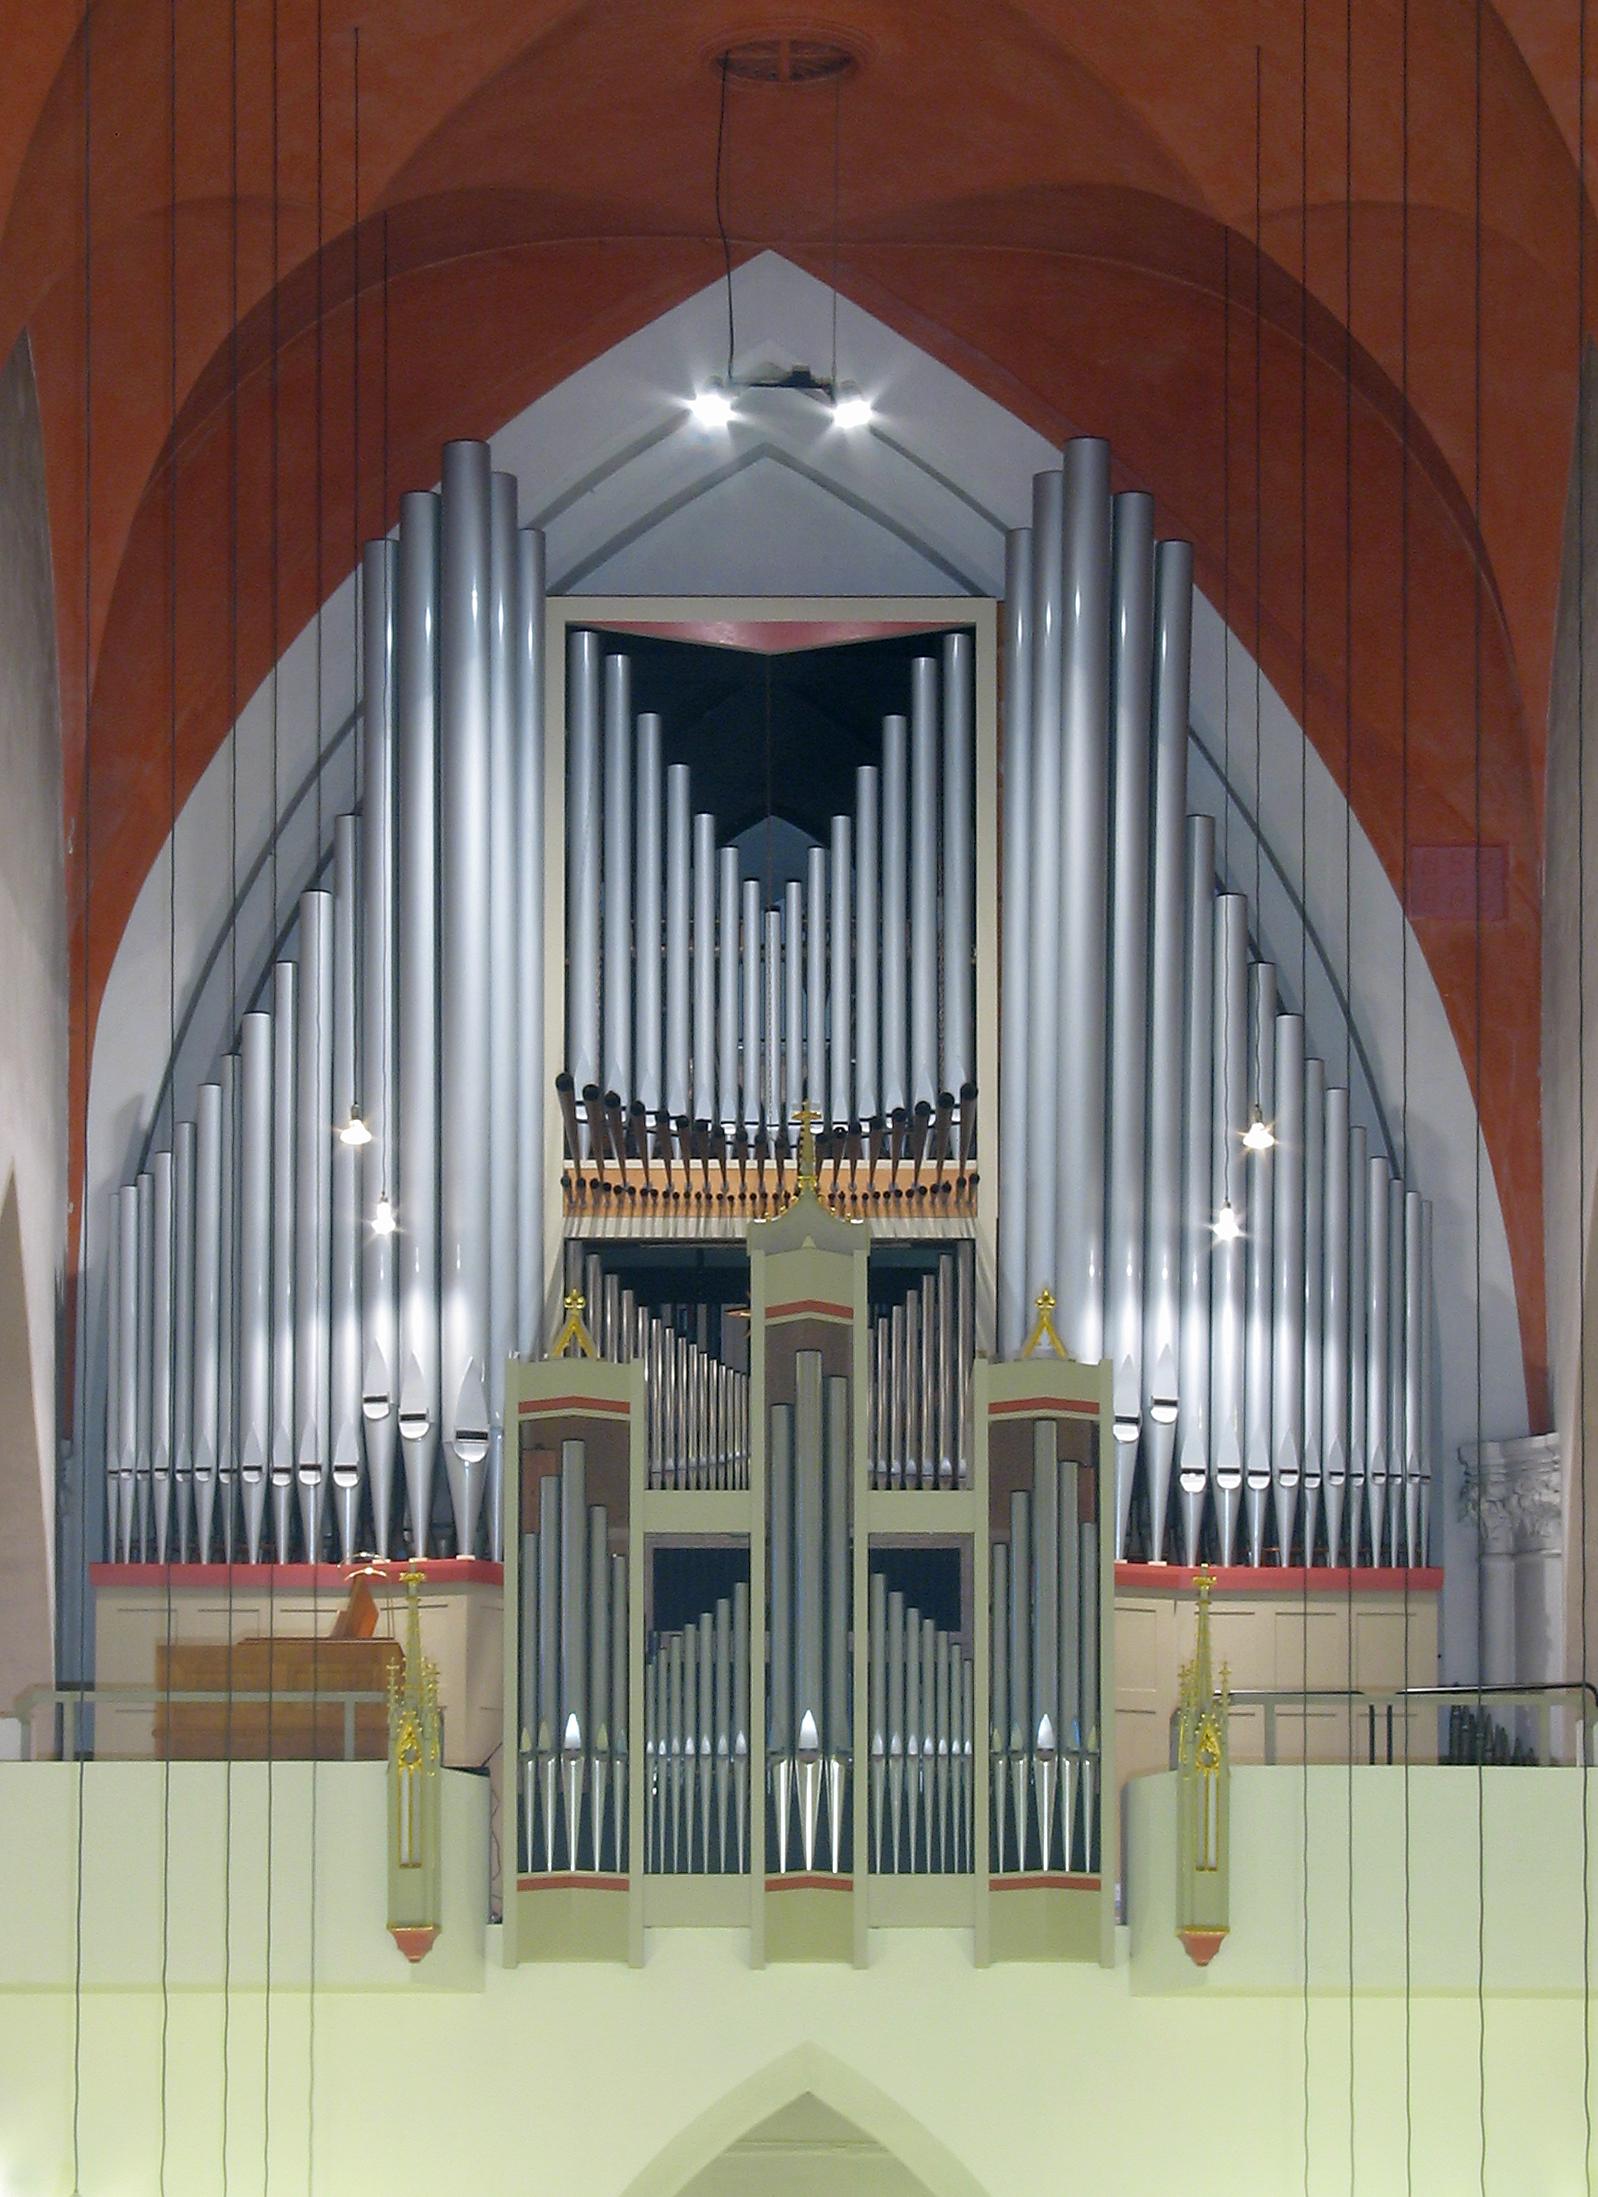 Orgel in St. Andreas (c) Olaf D. Hennig